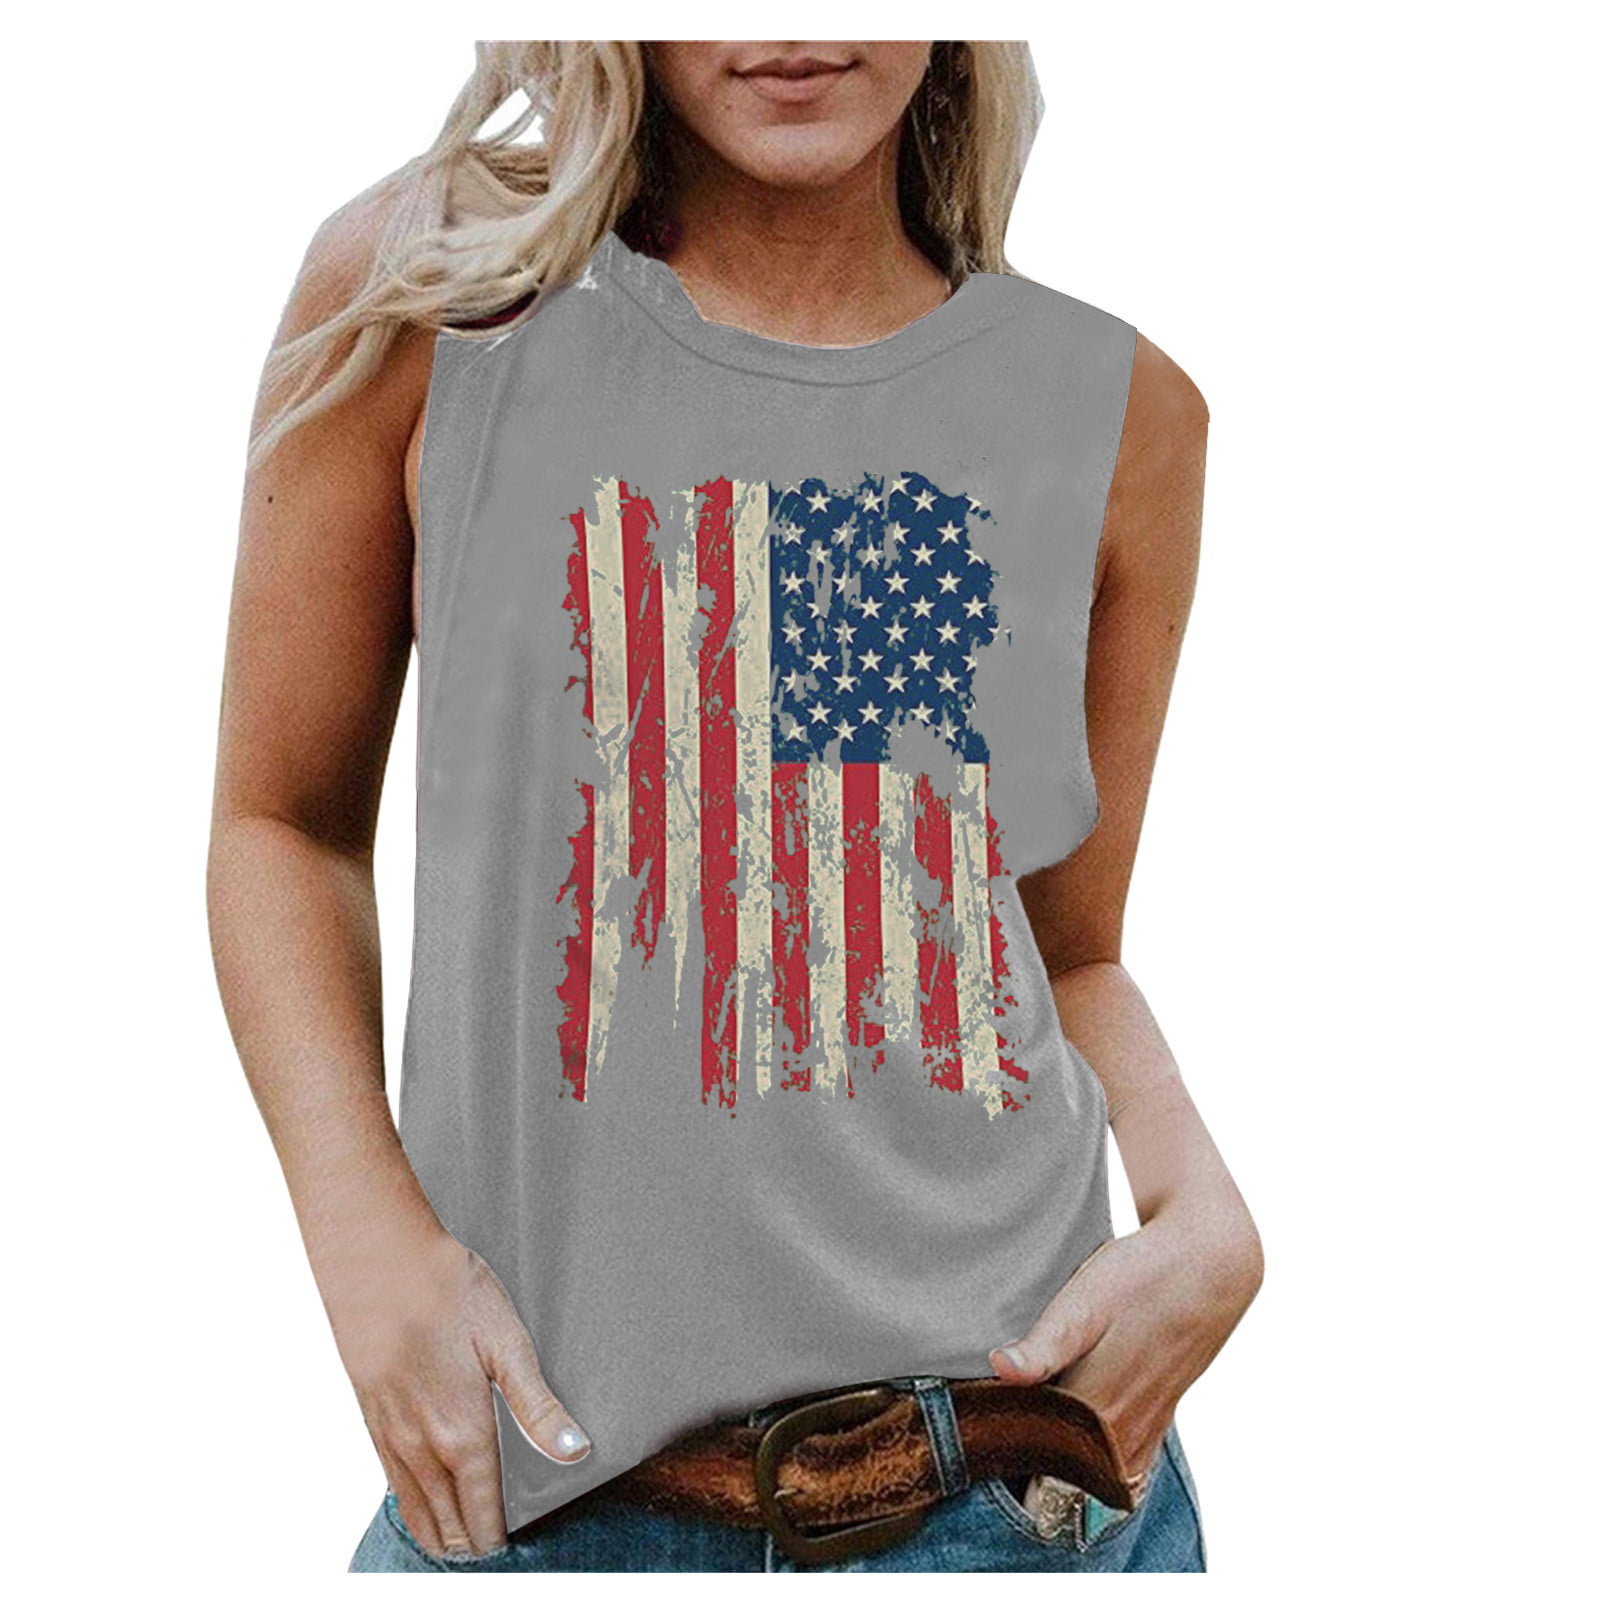 4th of July Shirts for Women Sleeveless O-Neck America Flag Print Two-Tone Stitching Top Tank T-Shirt Tops Blouse